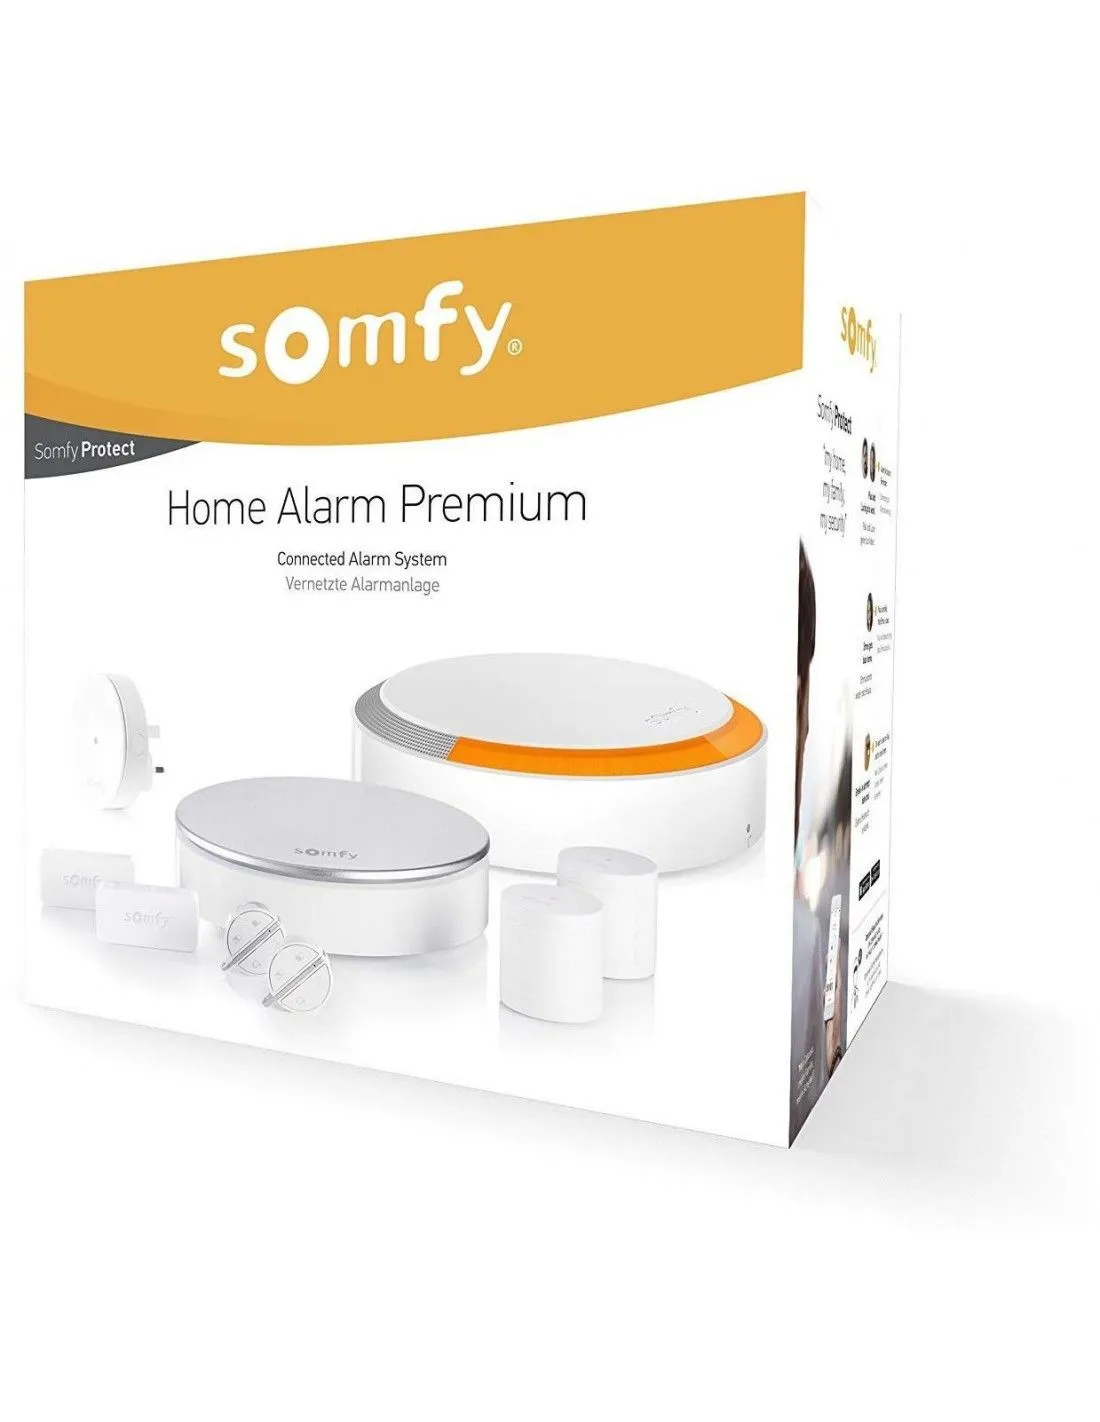 Battery protection Somfy home alarm protect badge MyFox GREEN alarm